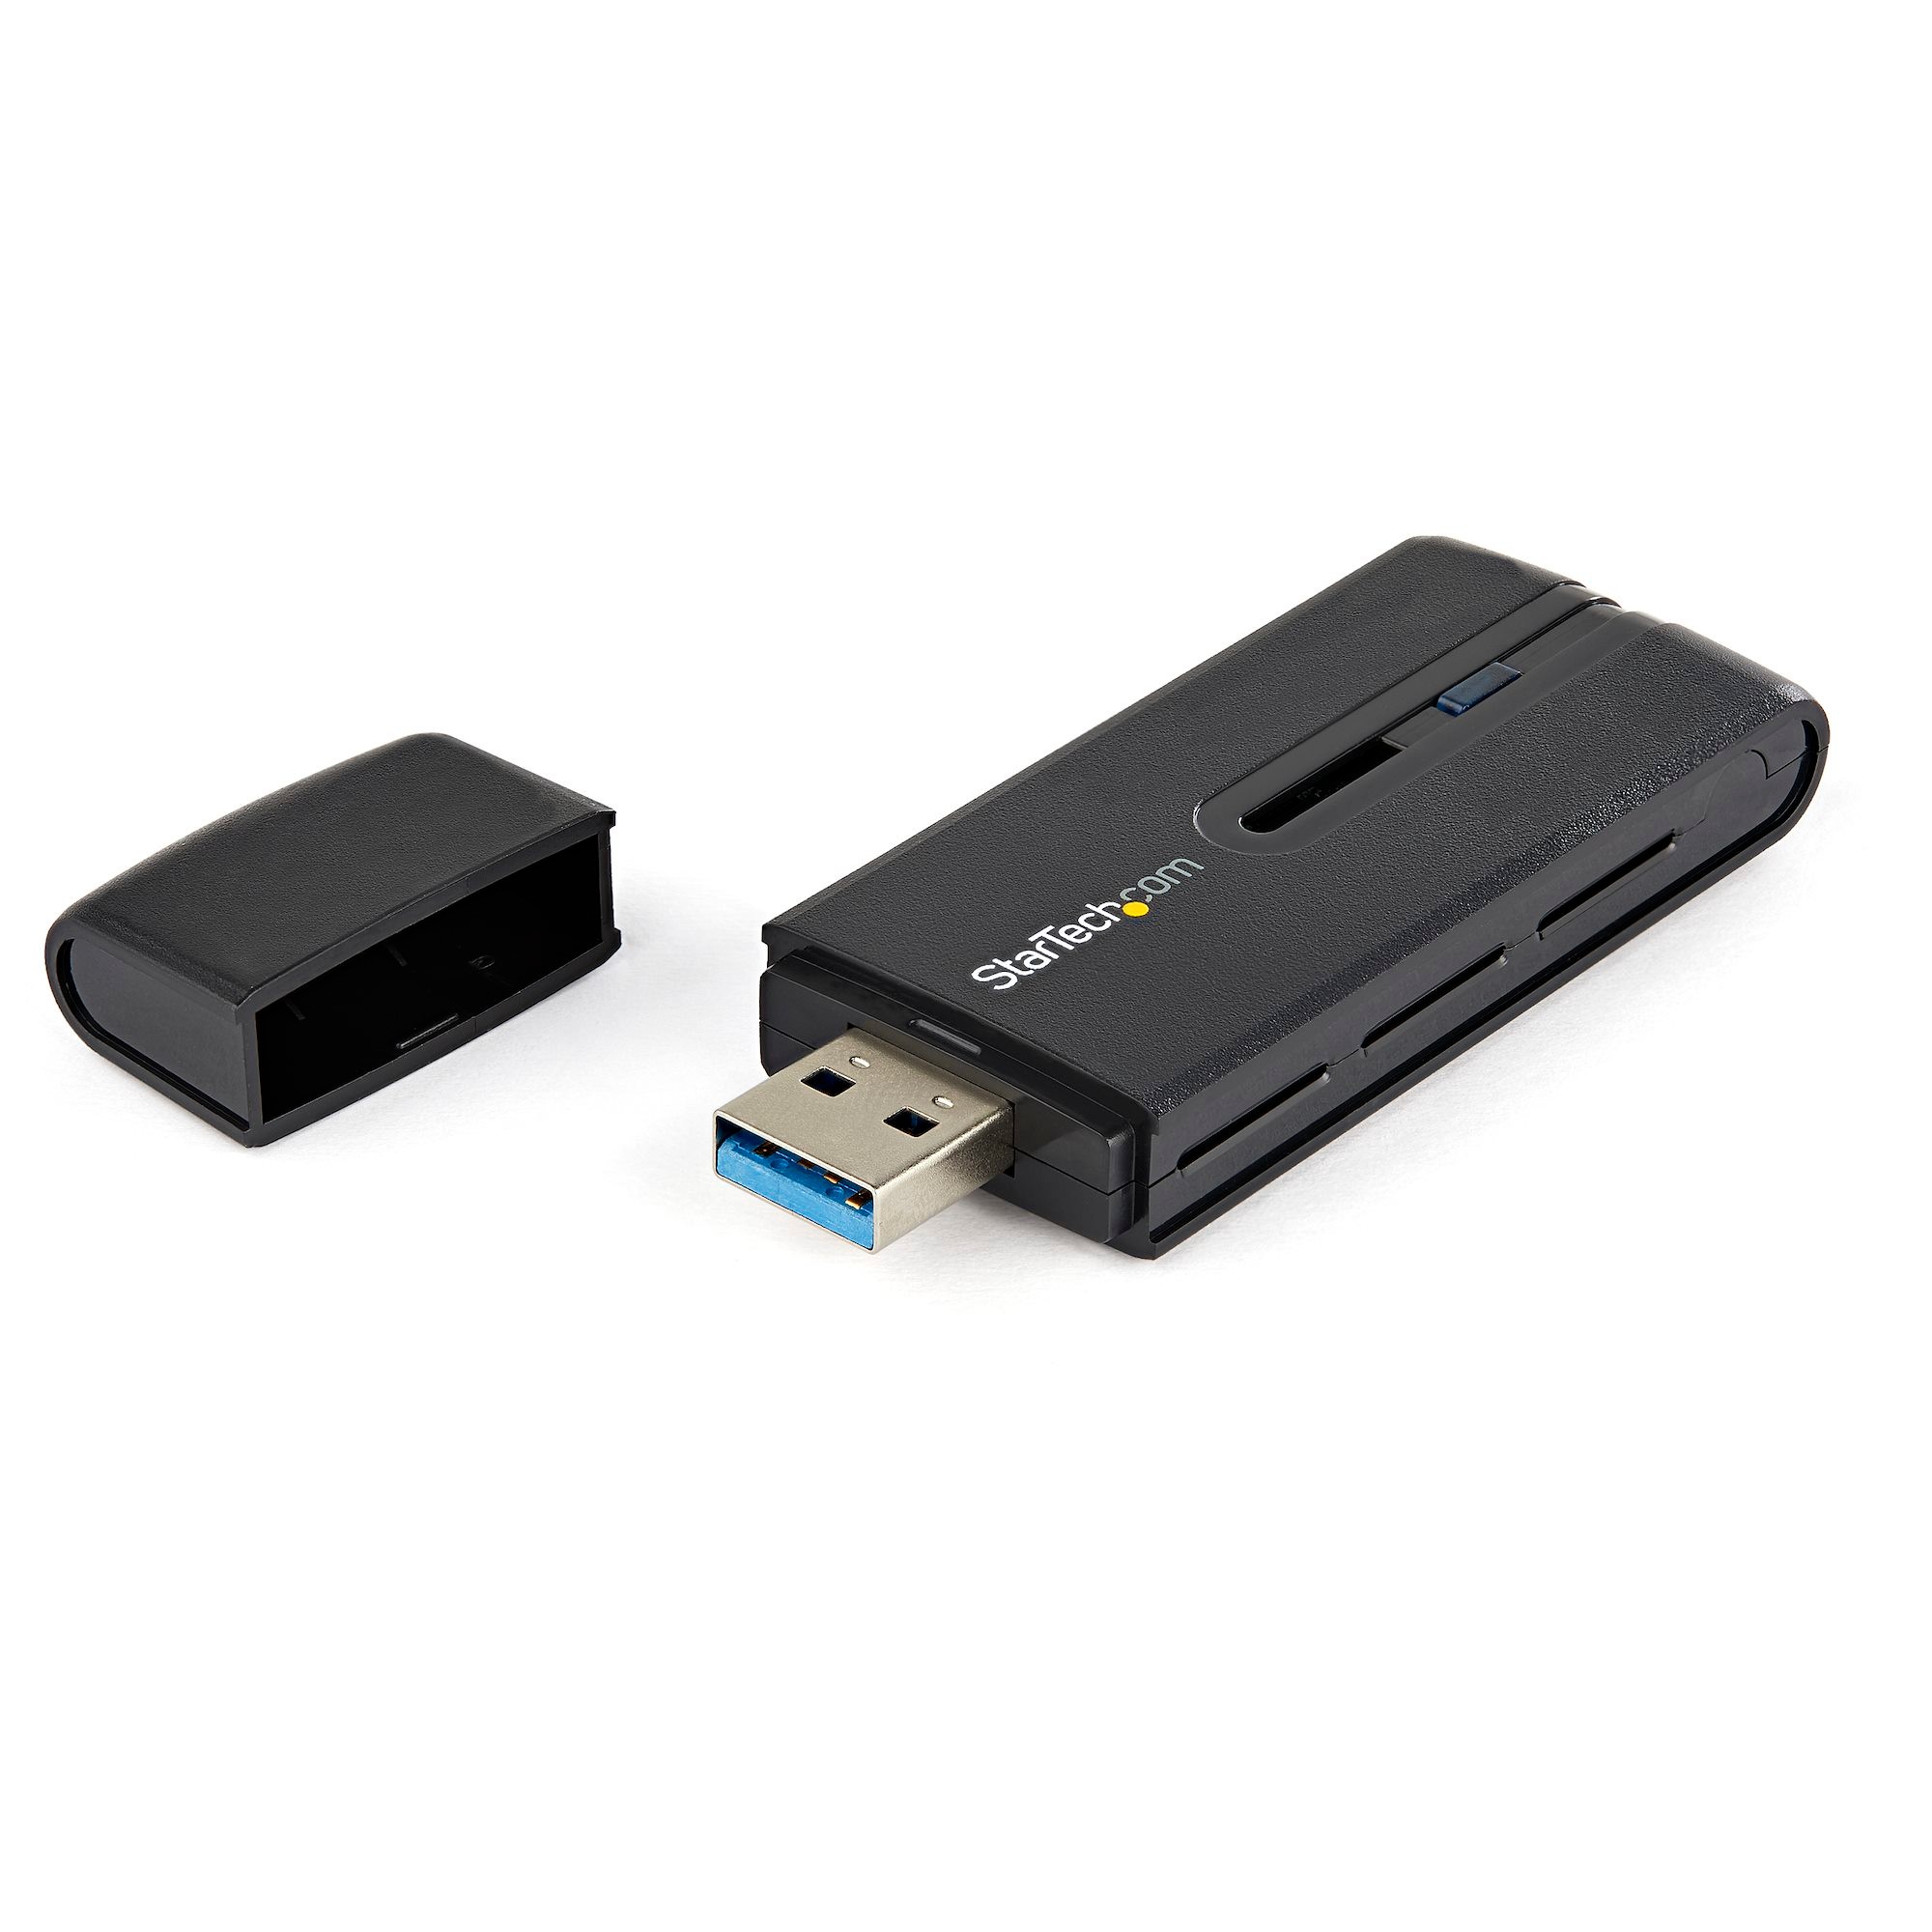 Ikke moderigtigt heldig Adskille StarTech.com USB 3.0 AC1200 Dual Band Wireless-AC Network Adapter -  802.11ac WiFi Adapter - Add dual-band Wireless-AC connectivity to a desktop  or laptop computer through USB 3.0 - USB 3.0 AC1200 Dual